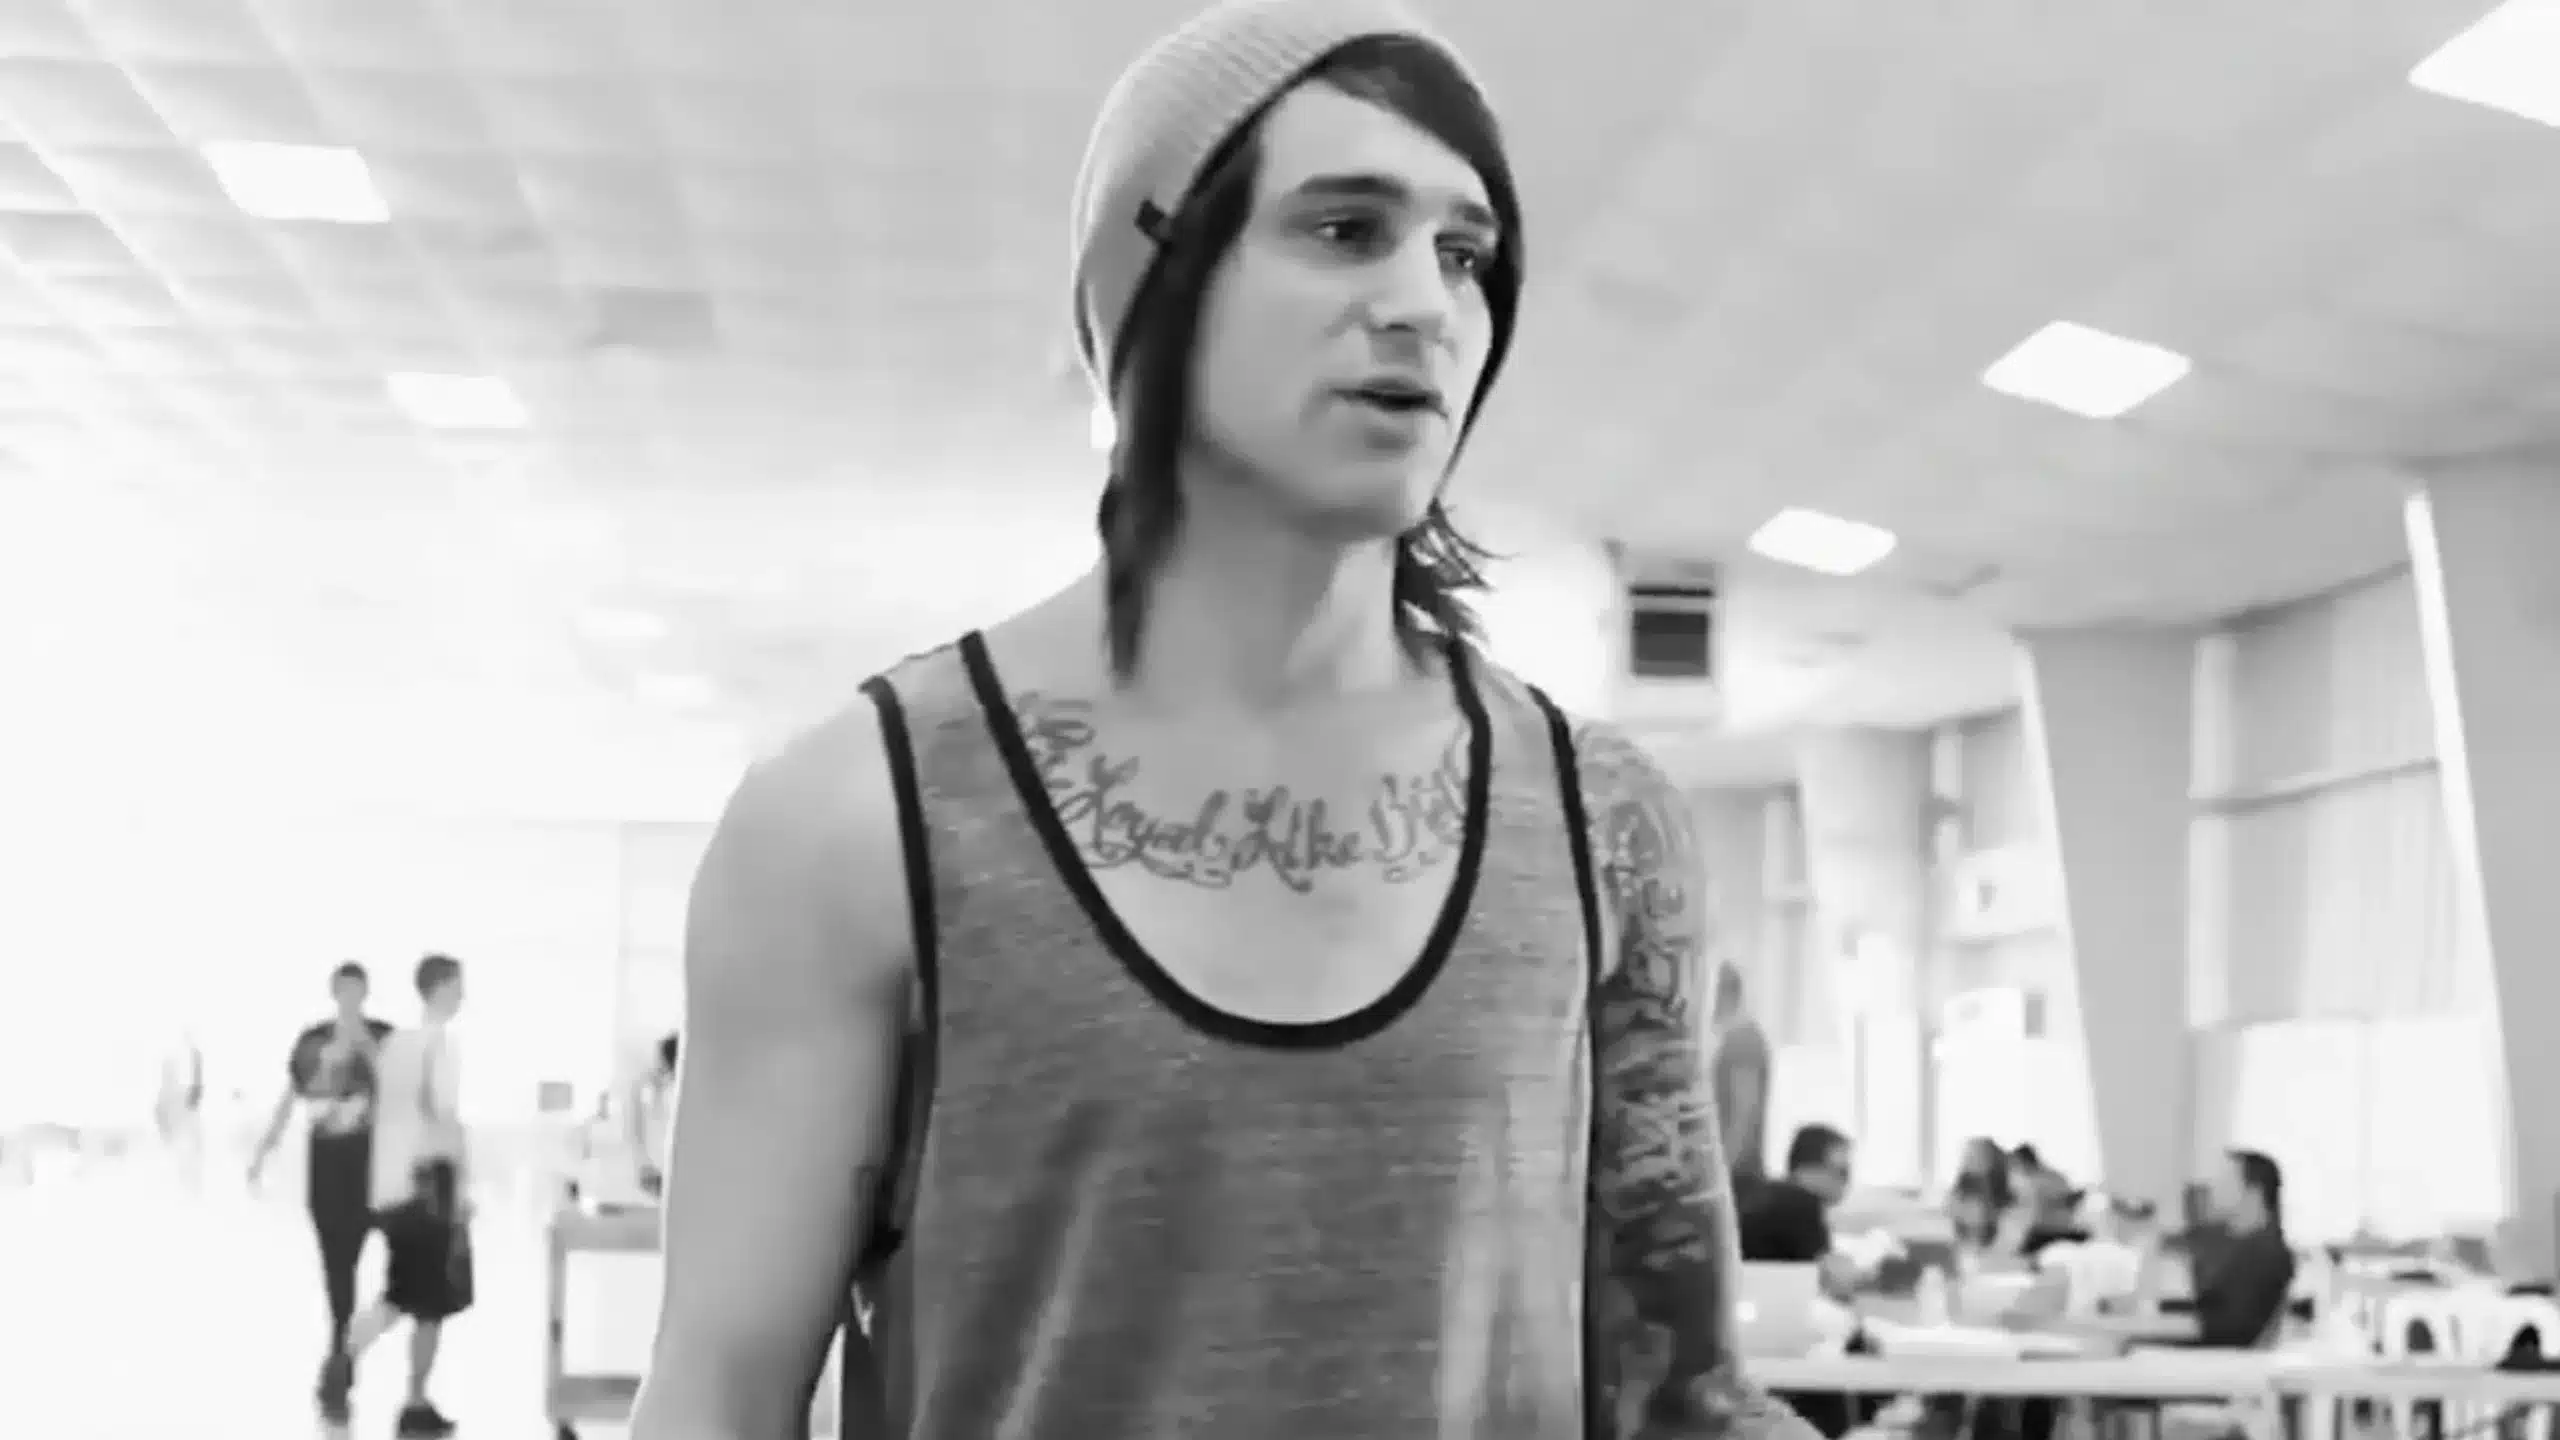 beau bokan talked about natural high